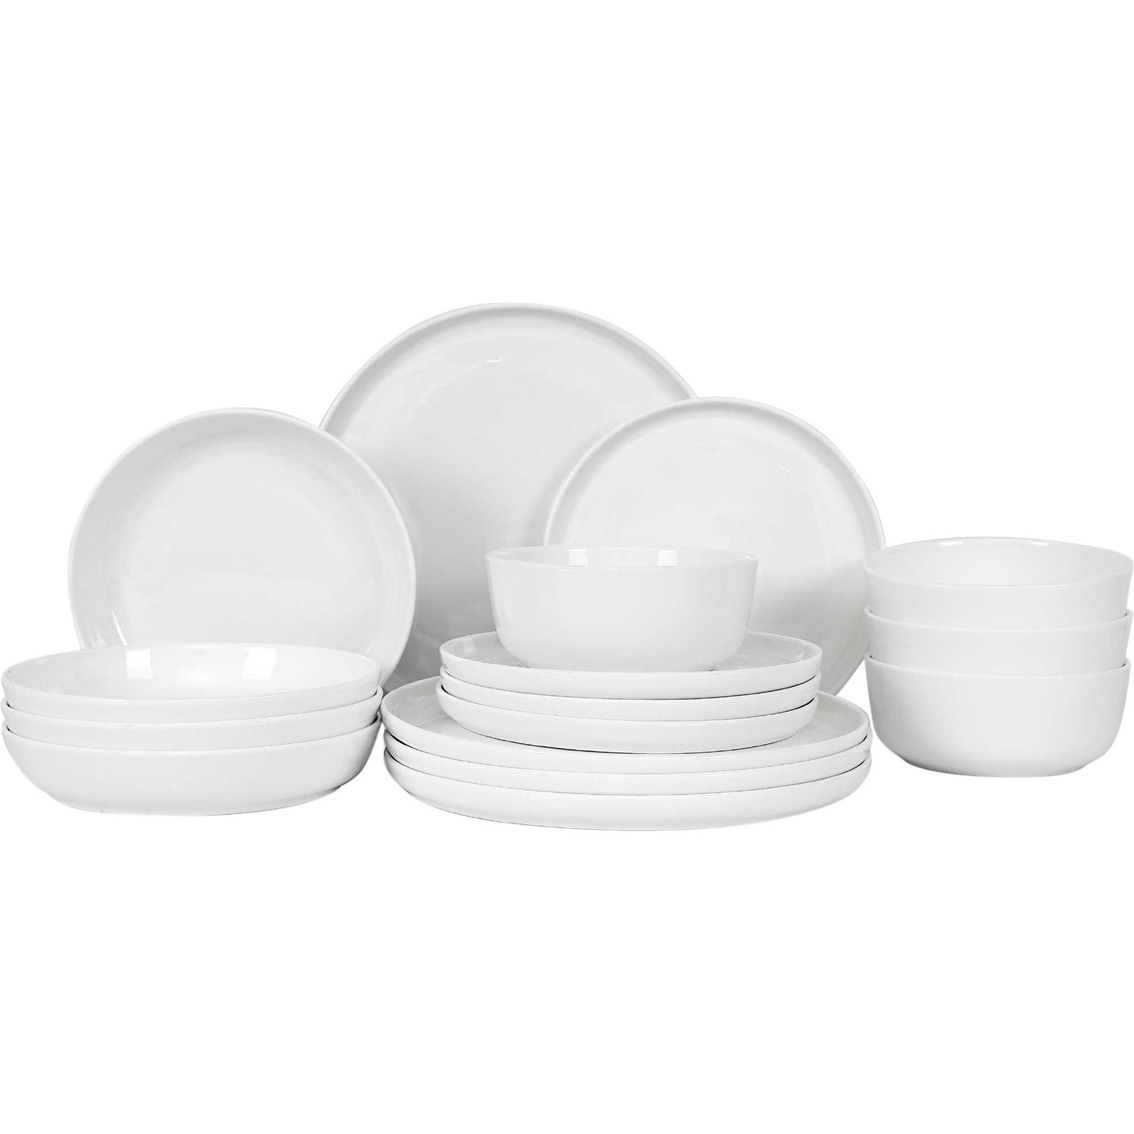 Table 12 Natural White Dinnerware Set 16 pc. - Image 7 of 7